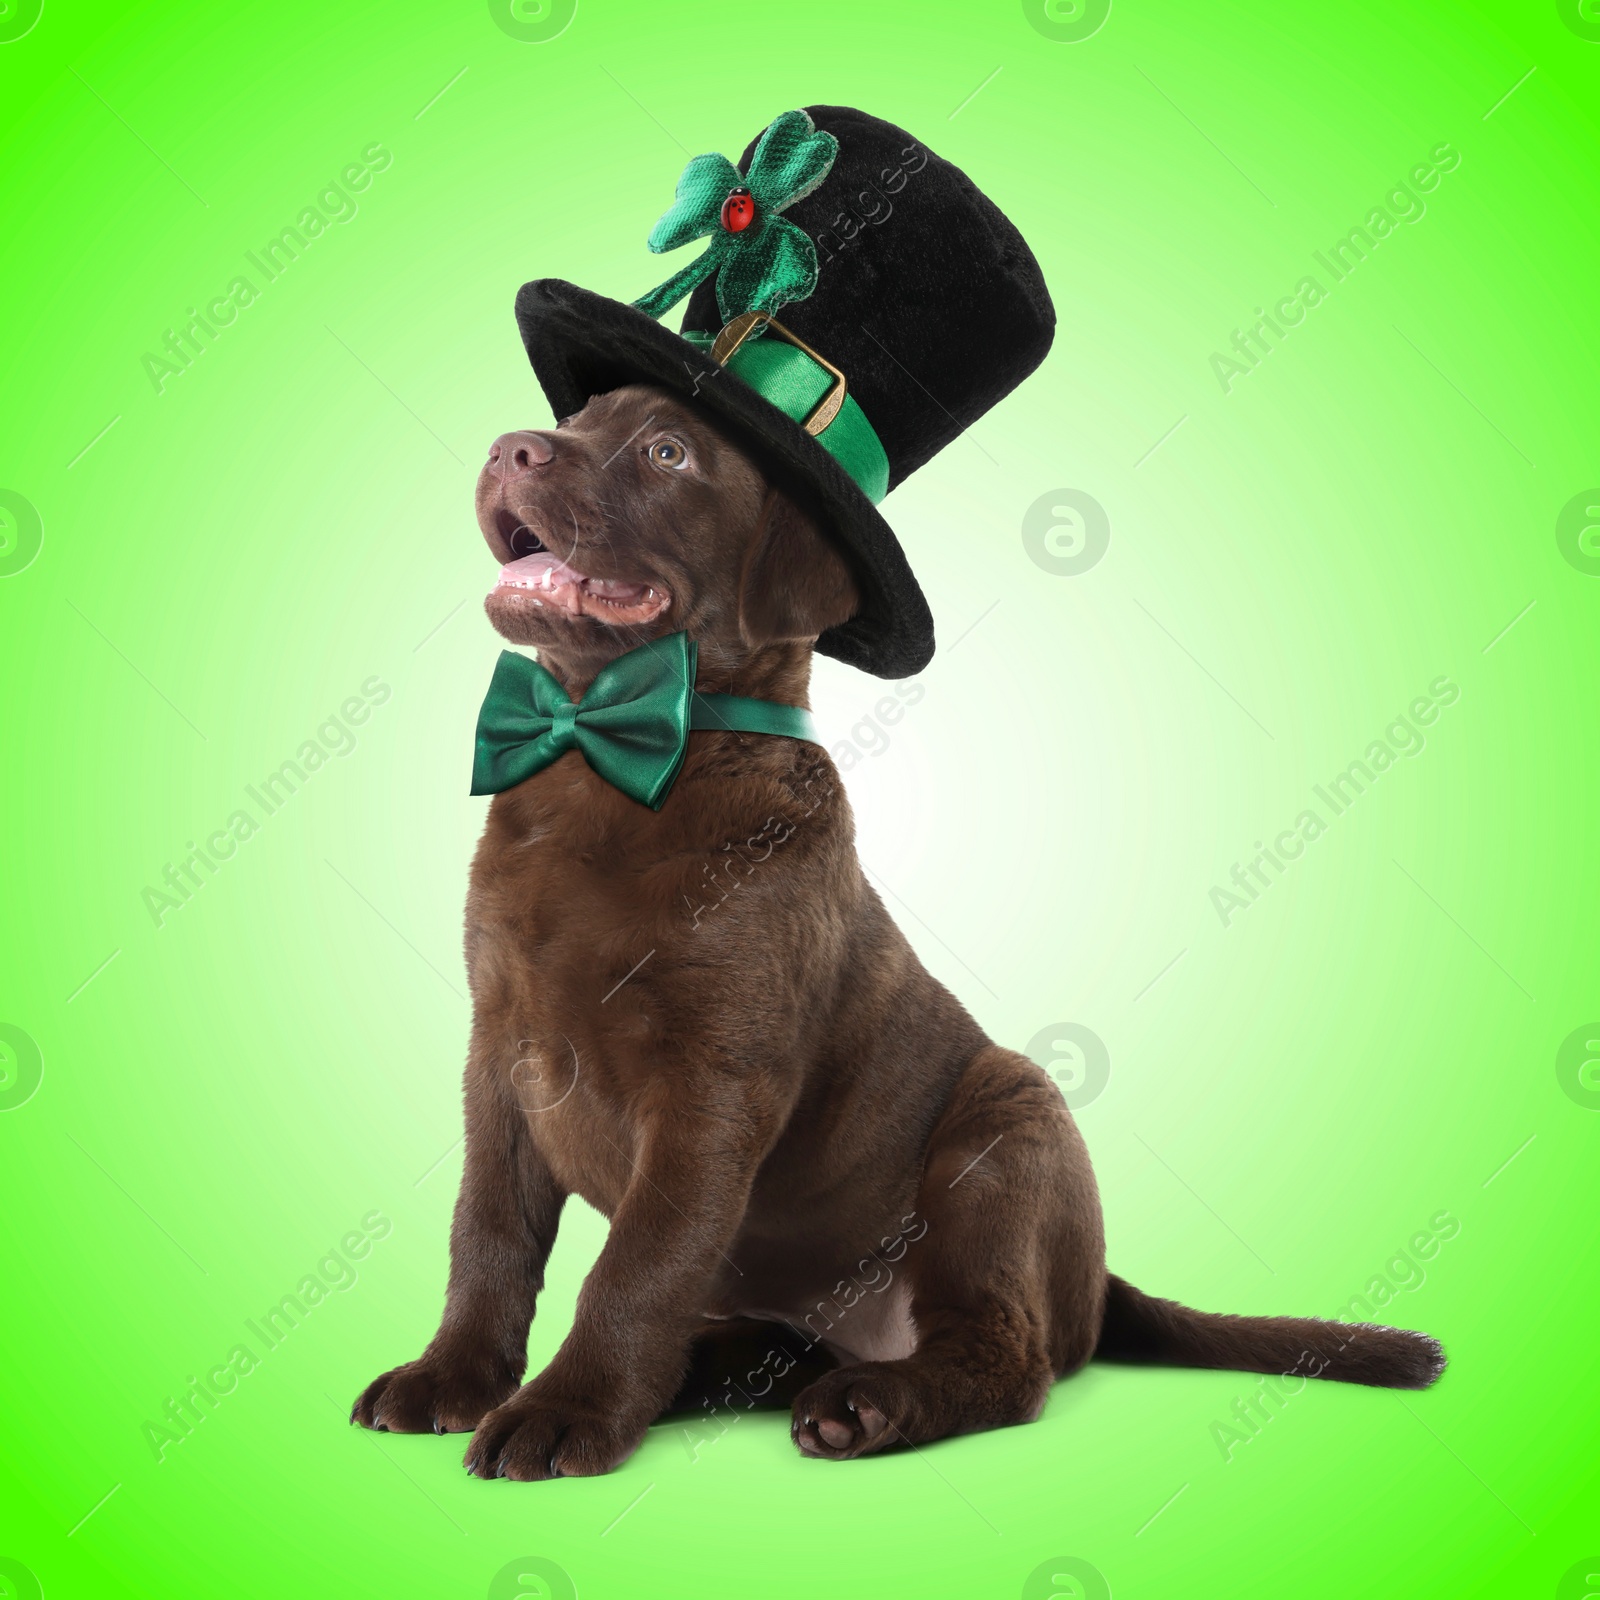 Image of St. Patrick's day celebration. Cute Chocolate Labrador puppy with leprechaun hat and bow tie on green background